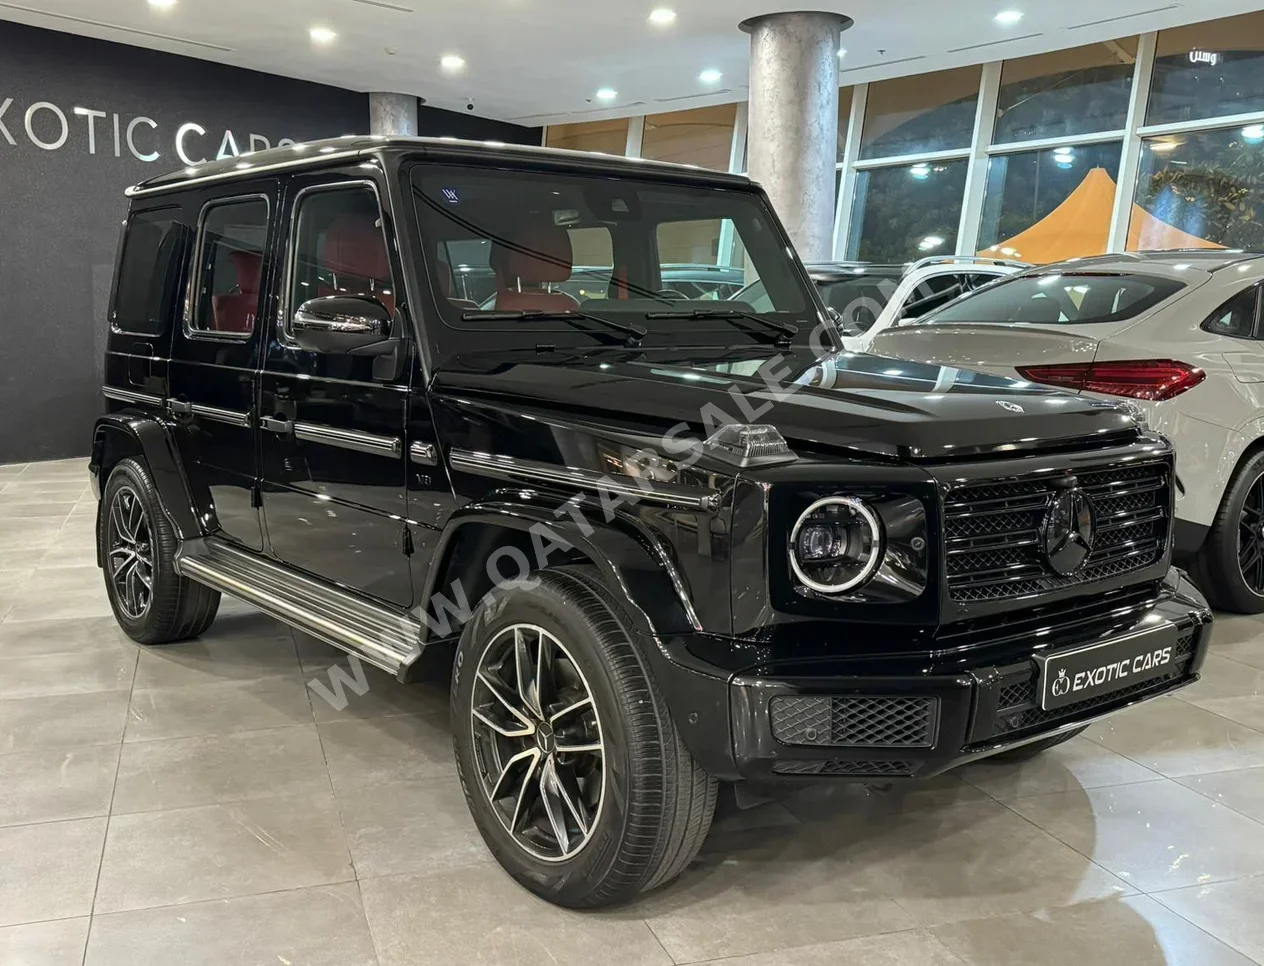 Mercedes-Benz  G-Class  500  2022  Automatic  21,000 Km  8 Cylinder  Four Wheel Drive (4WD)  SUV  Black  With Warranty